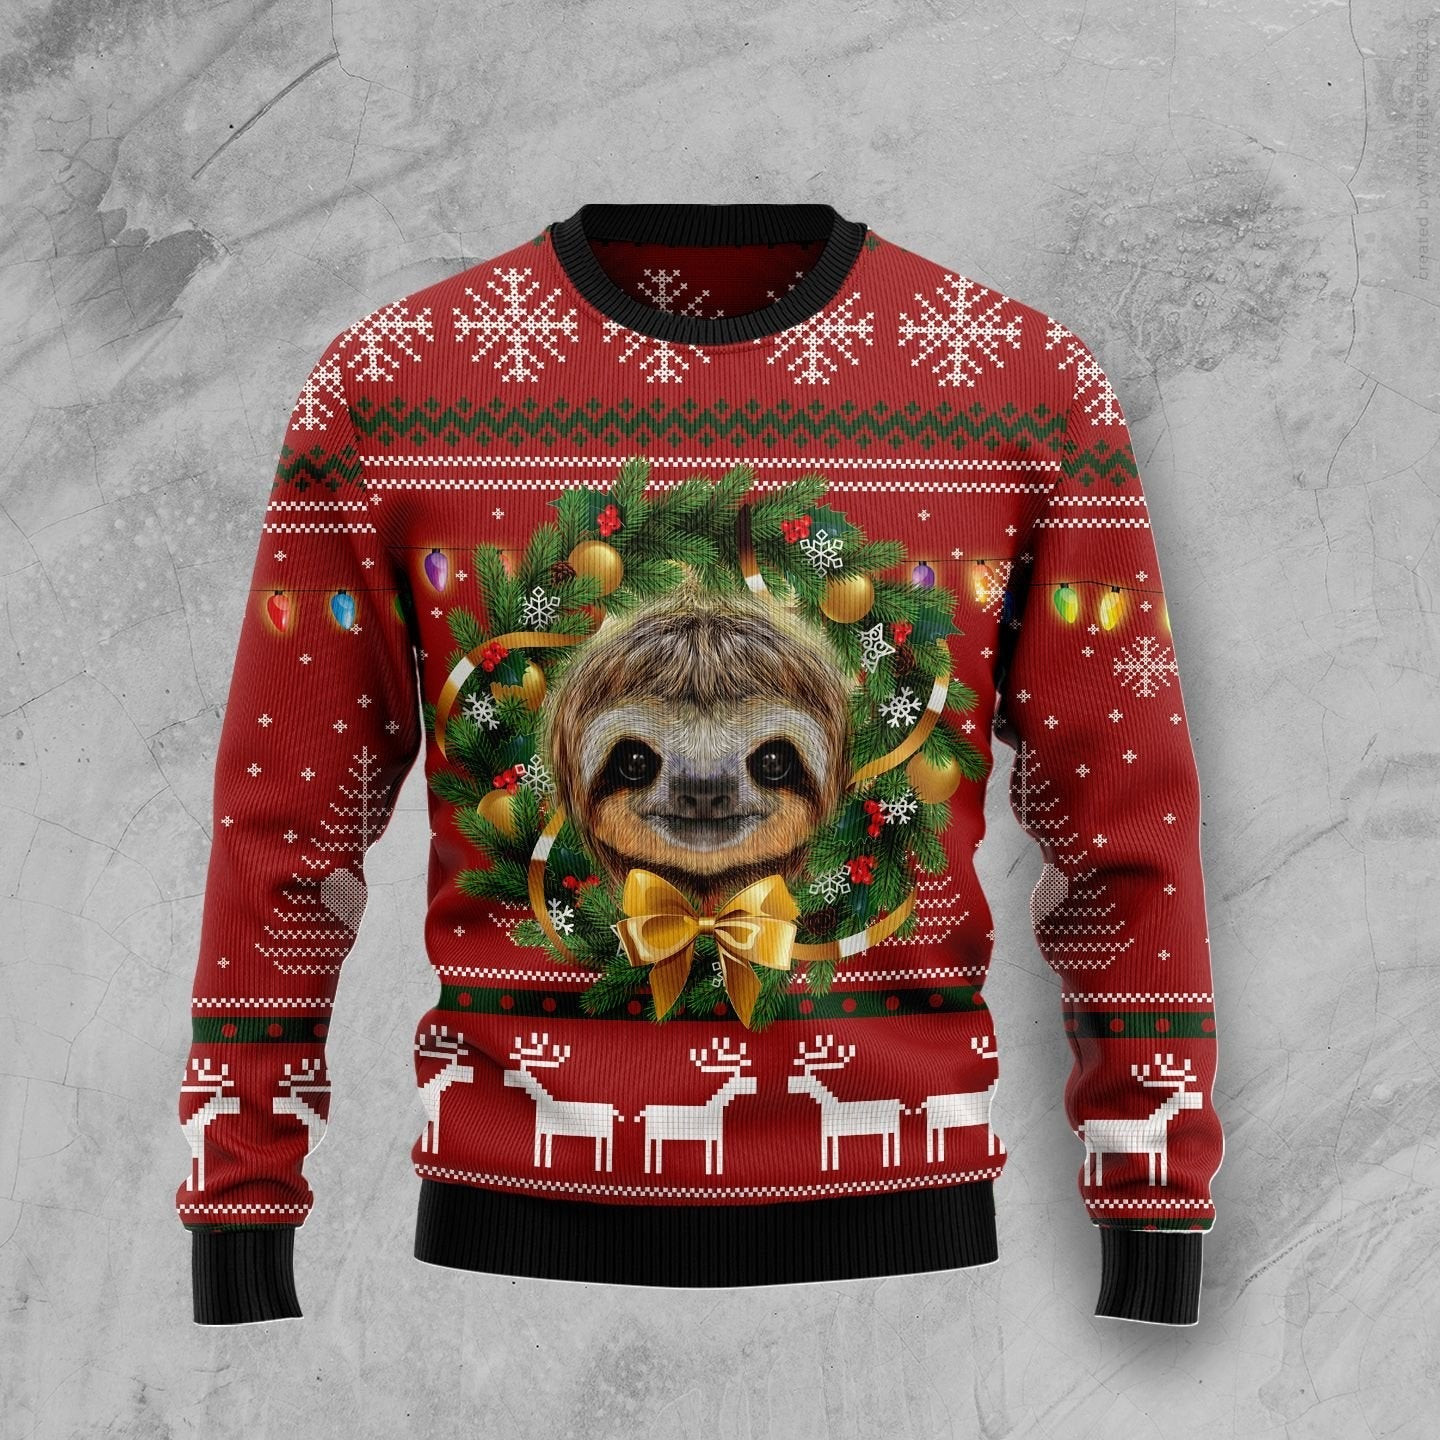 Merry Slothmas Ugly Christmas Sweater Ugly Sweater For Men Women, Holiday Sweater